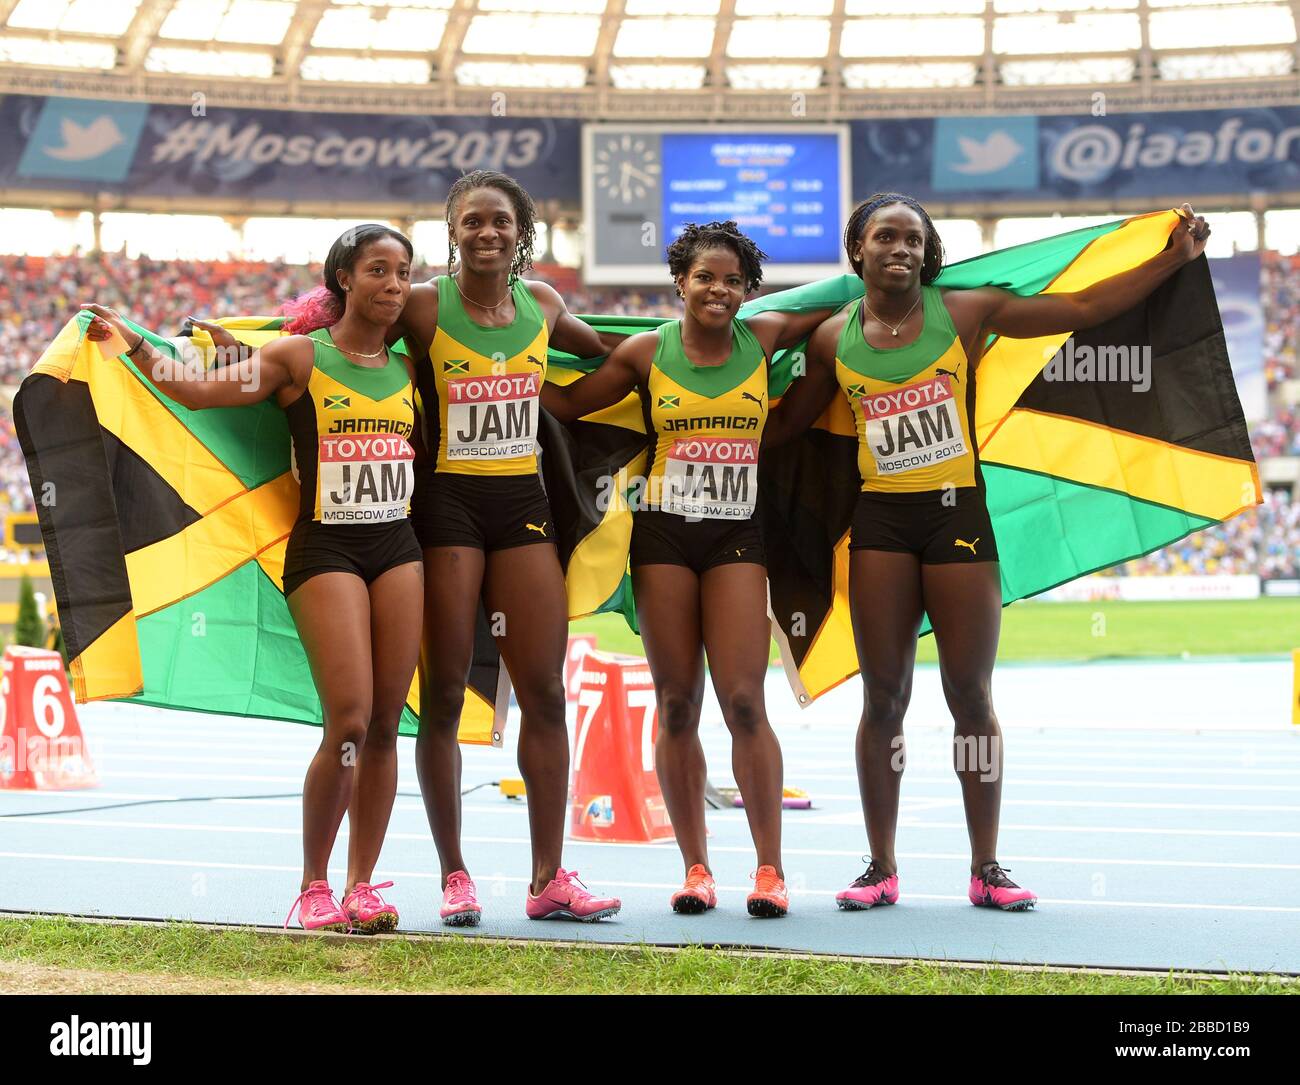 Jamaica's Shelly-Ann Fraser-Pryce, Kerron Stewart, Schillonie Calvert and Carrie Russell celebrate winning Gold in the Women's 4x100m Relay during day nine of the 2013 IAAF World Athletics Championships at the Luzhniki Stadium in Moscow, Russia. Stock Photo